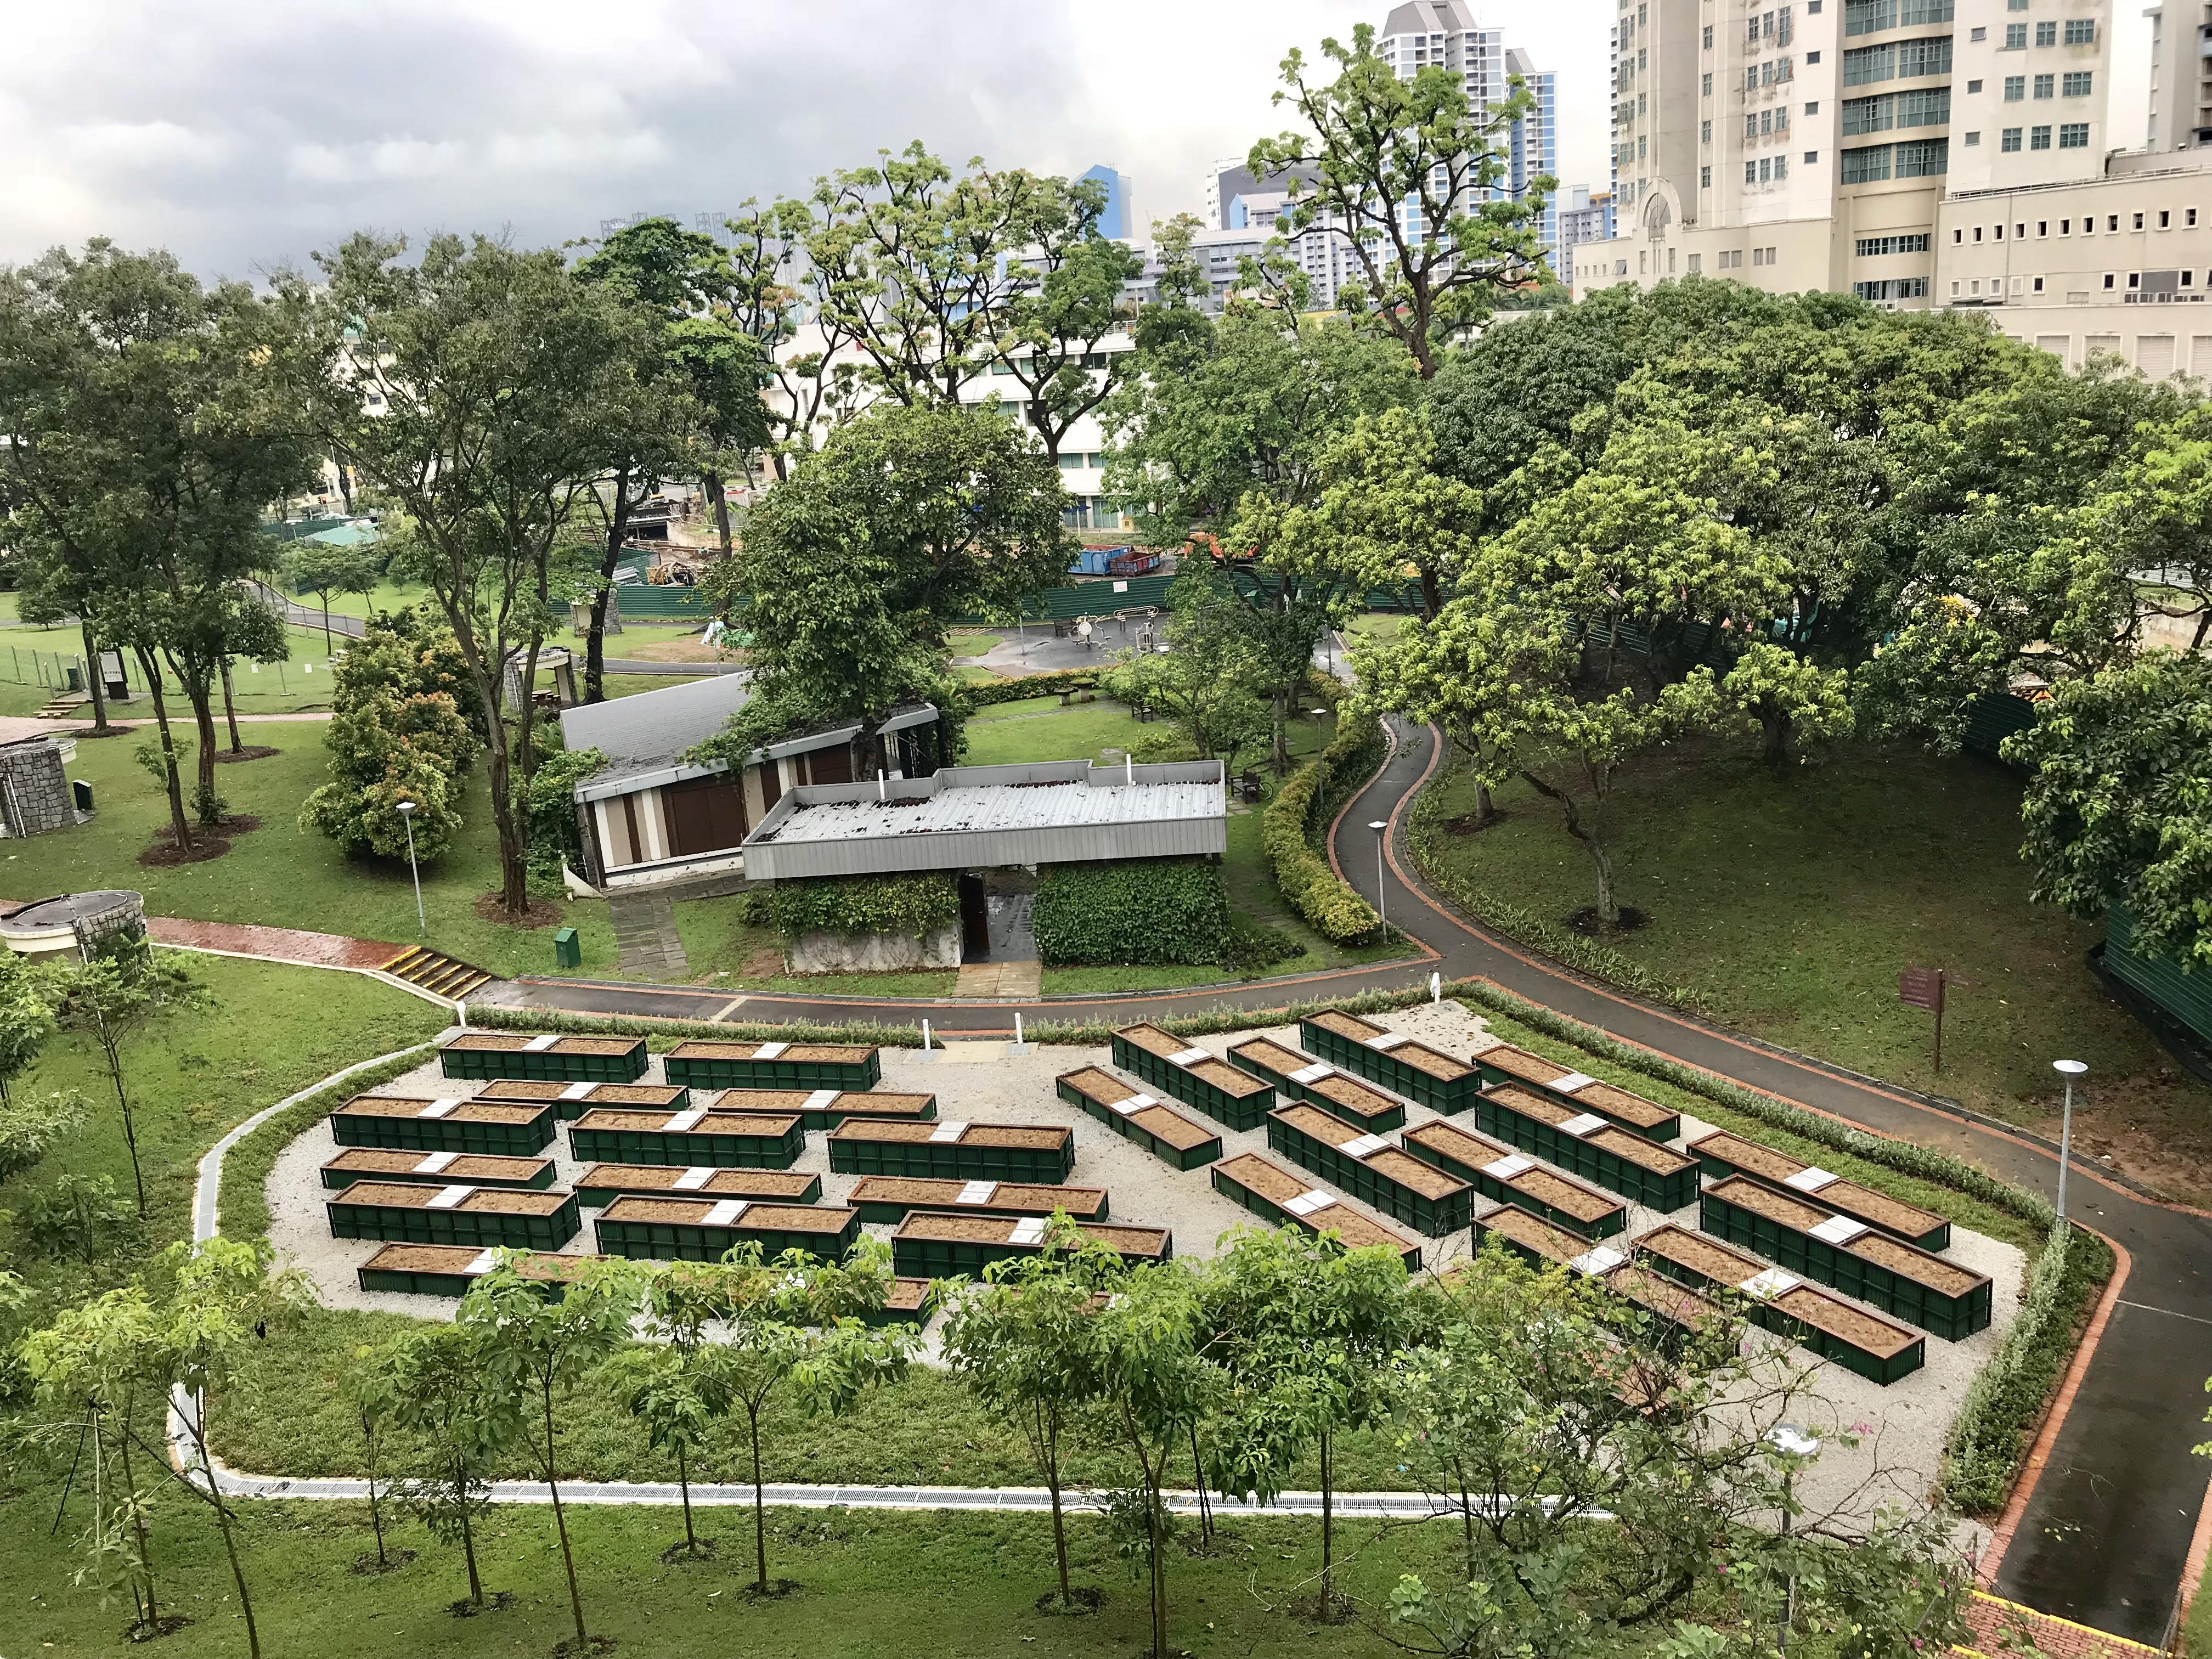 Allotment Gardens at Clementi Woods Park